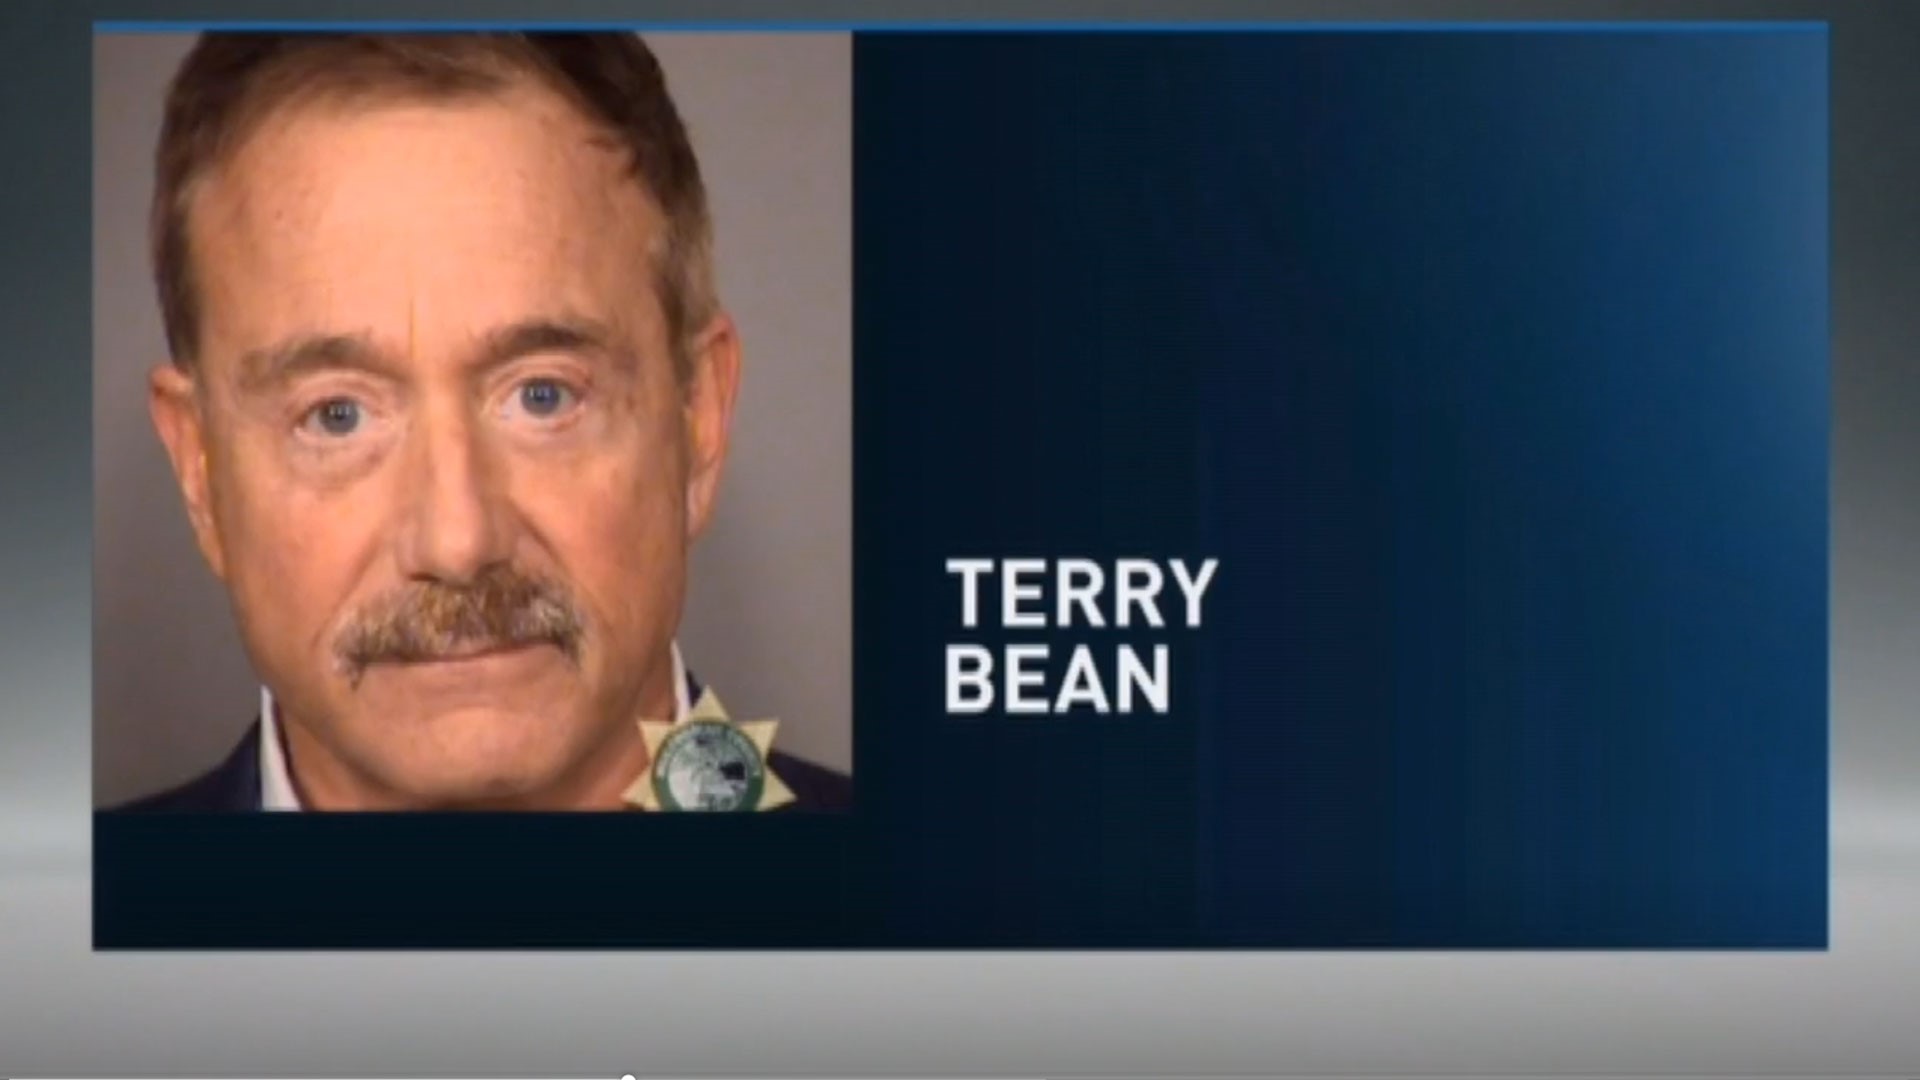 Bean case dismissed – Judge drops abuse charges against Terry Bean